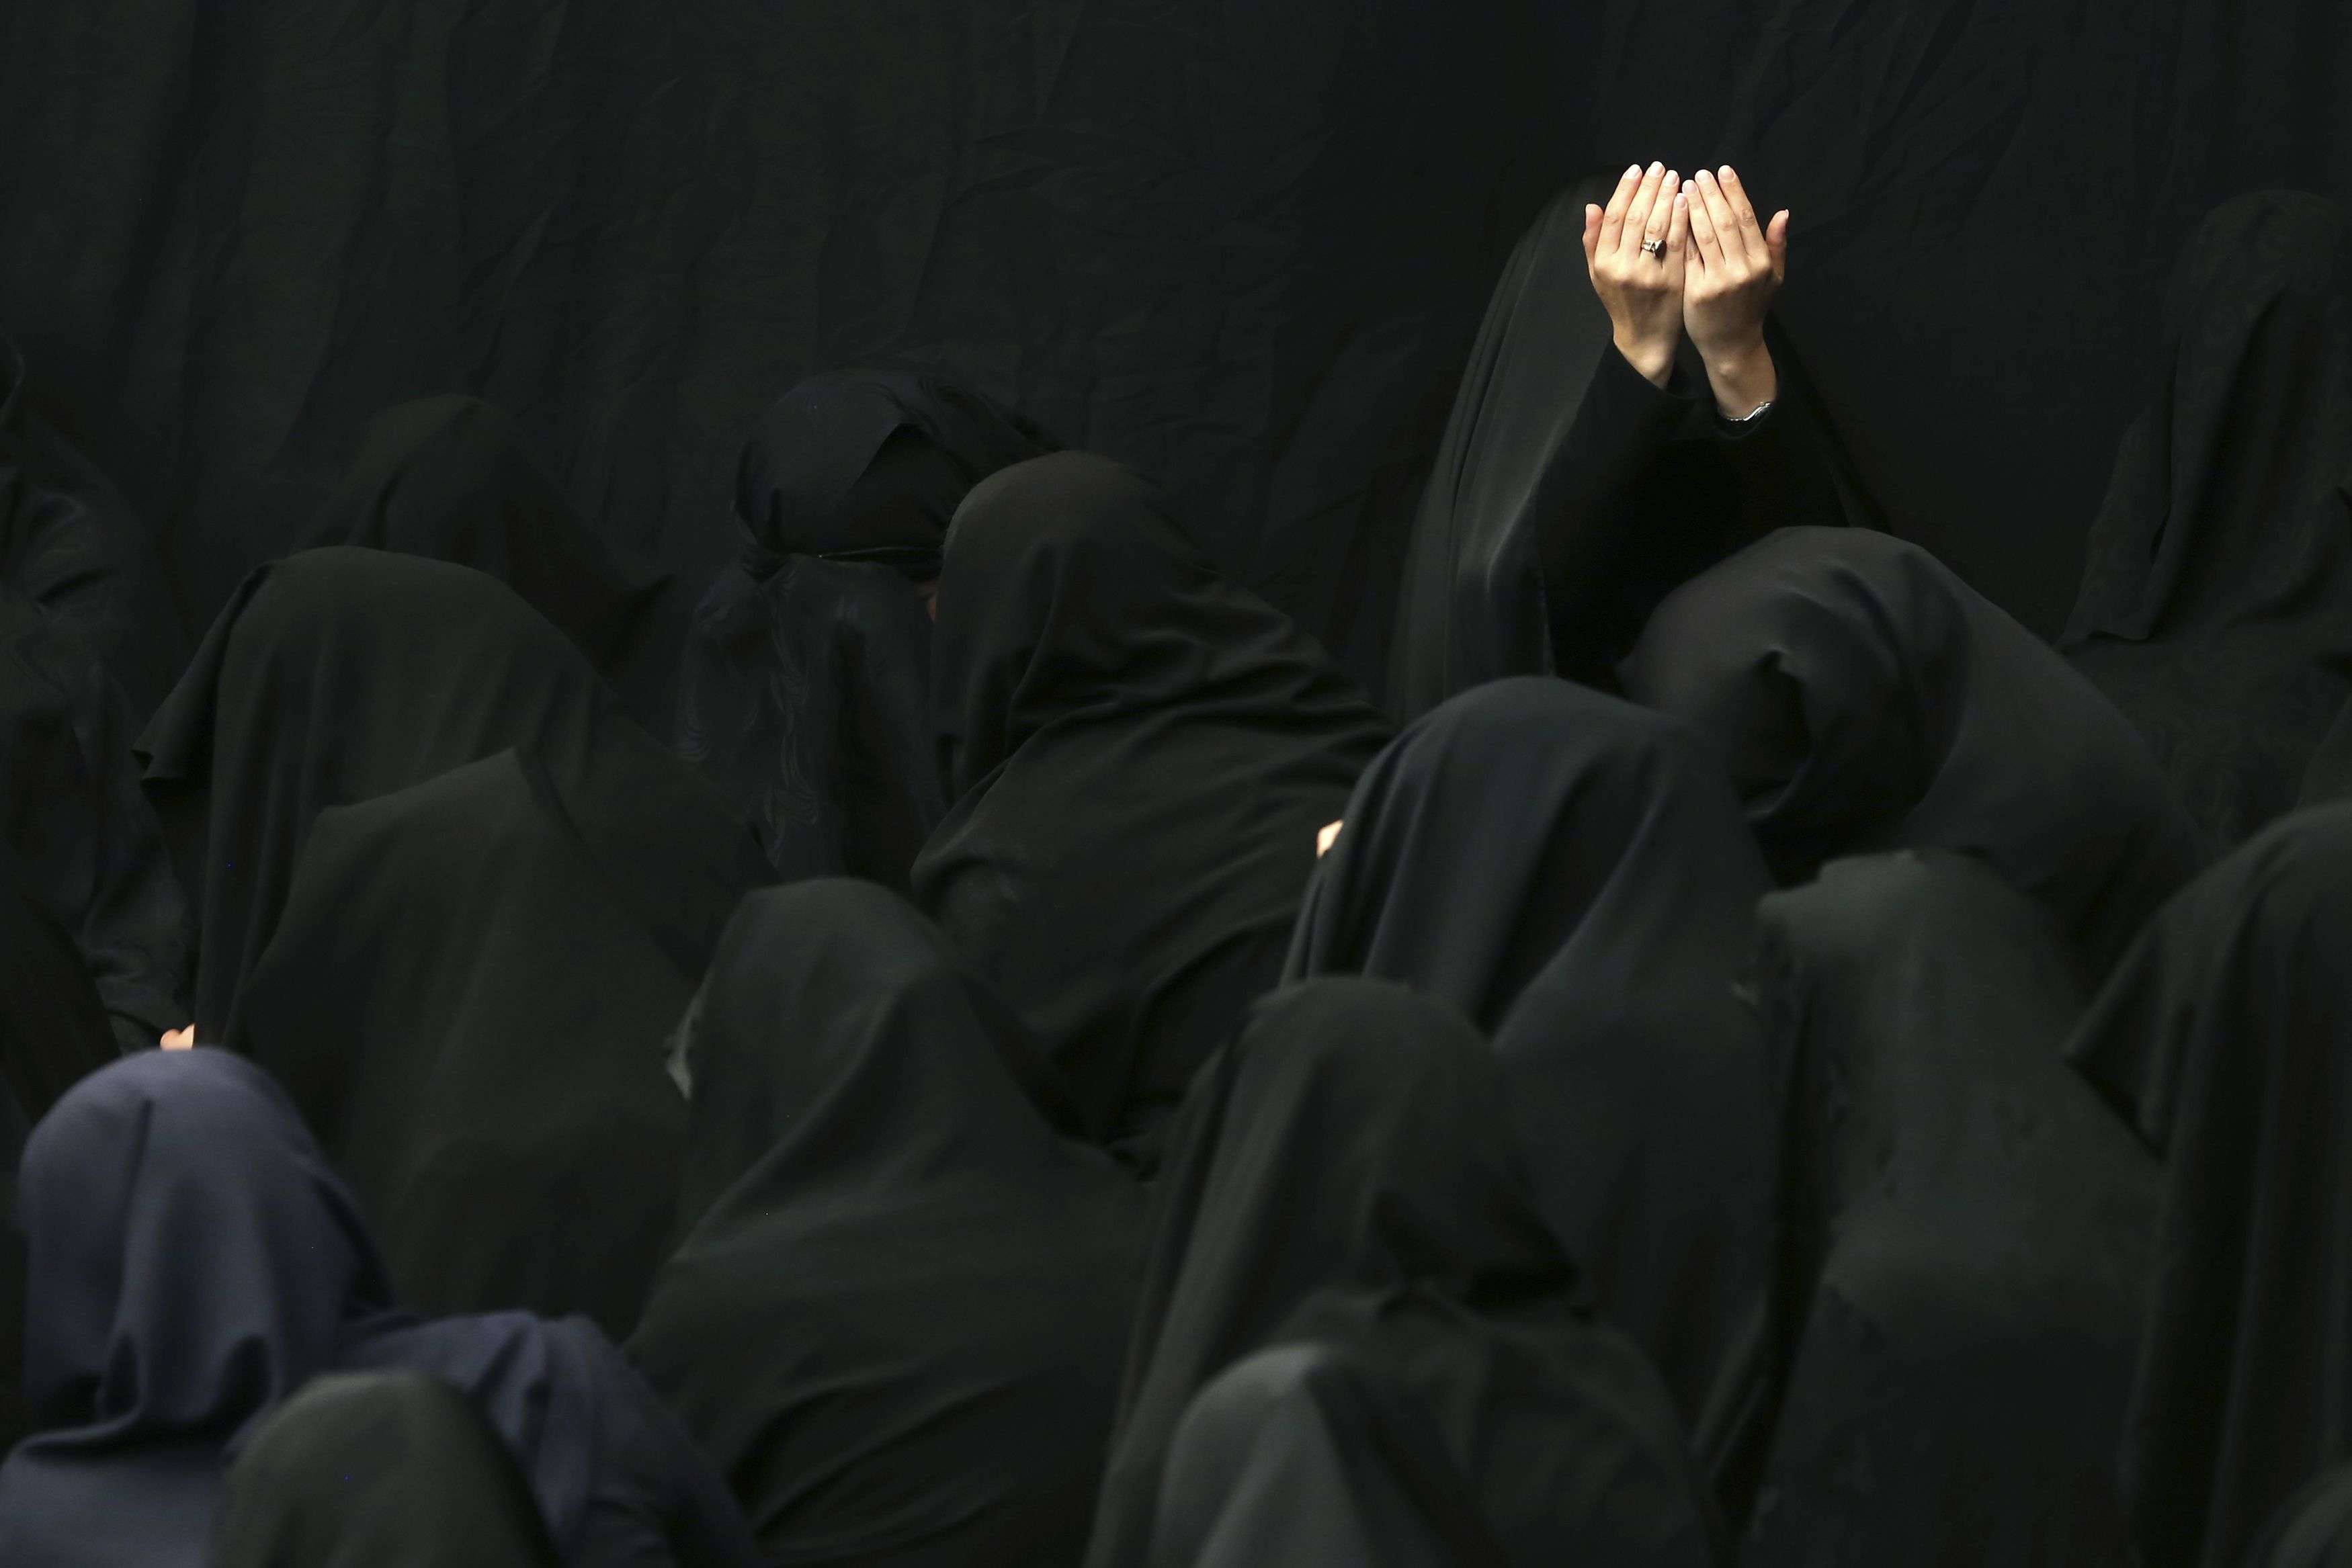 Iranian Shiite Muslim women mourn during a ceremony at Sadat Akhavi Mosque in Tehran, Iran, Sunday, Oct. 9, 2016, three days prior to the death anniversary of 7th century Shiite Imam Hussein, the grandson of Prophet Muhammad, who was killed in a battle in Karbala in present-day Iraq. (AP Photo/Ebrahim Noroozi)